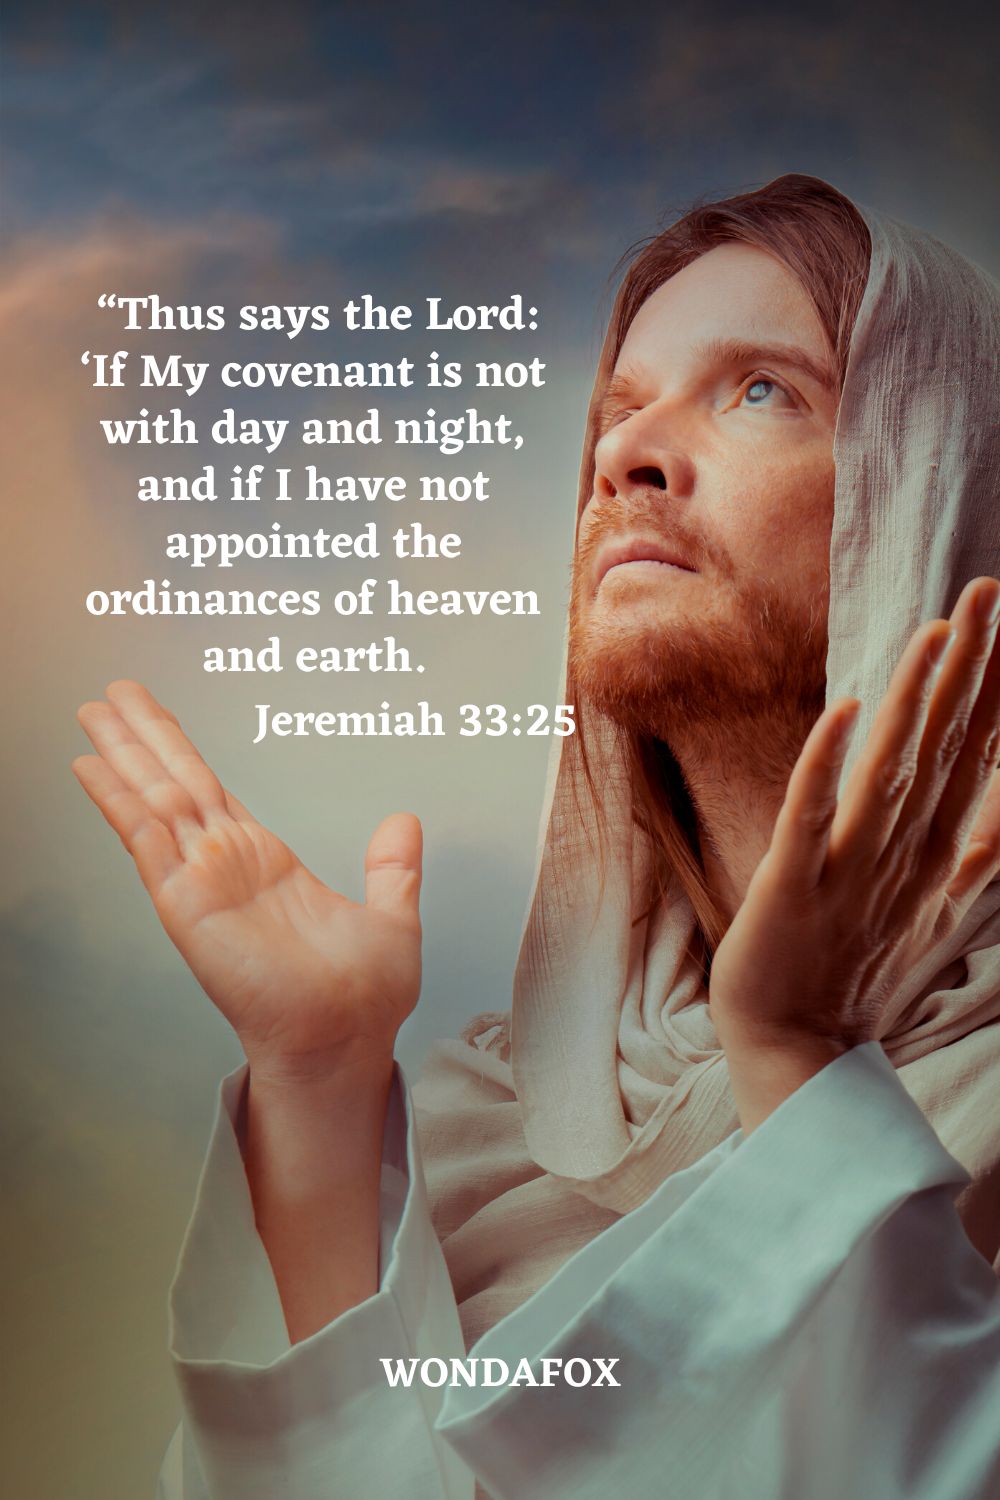  “Thus says the Lord: ‘If My covenant is not with day and night, and if I have not appointed the ordinances of heaven and earth.
Jeremiah 33:25